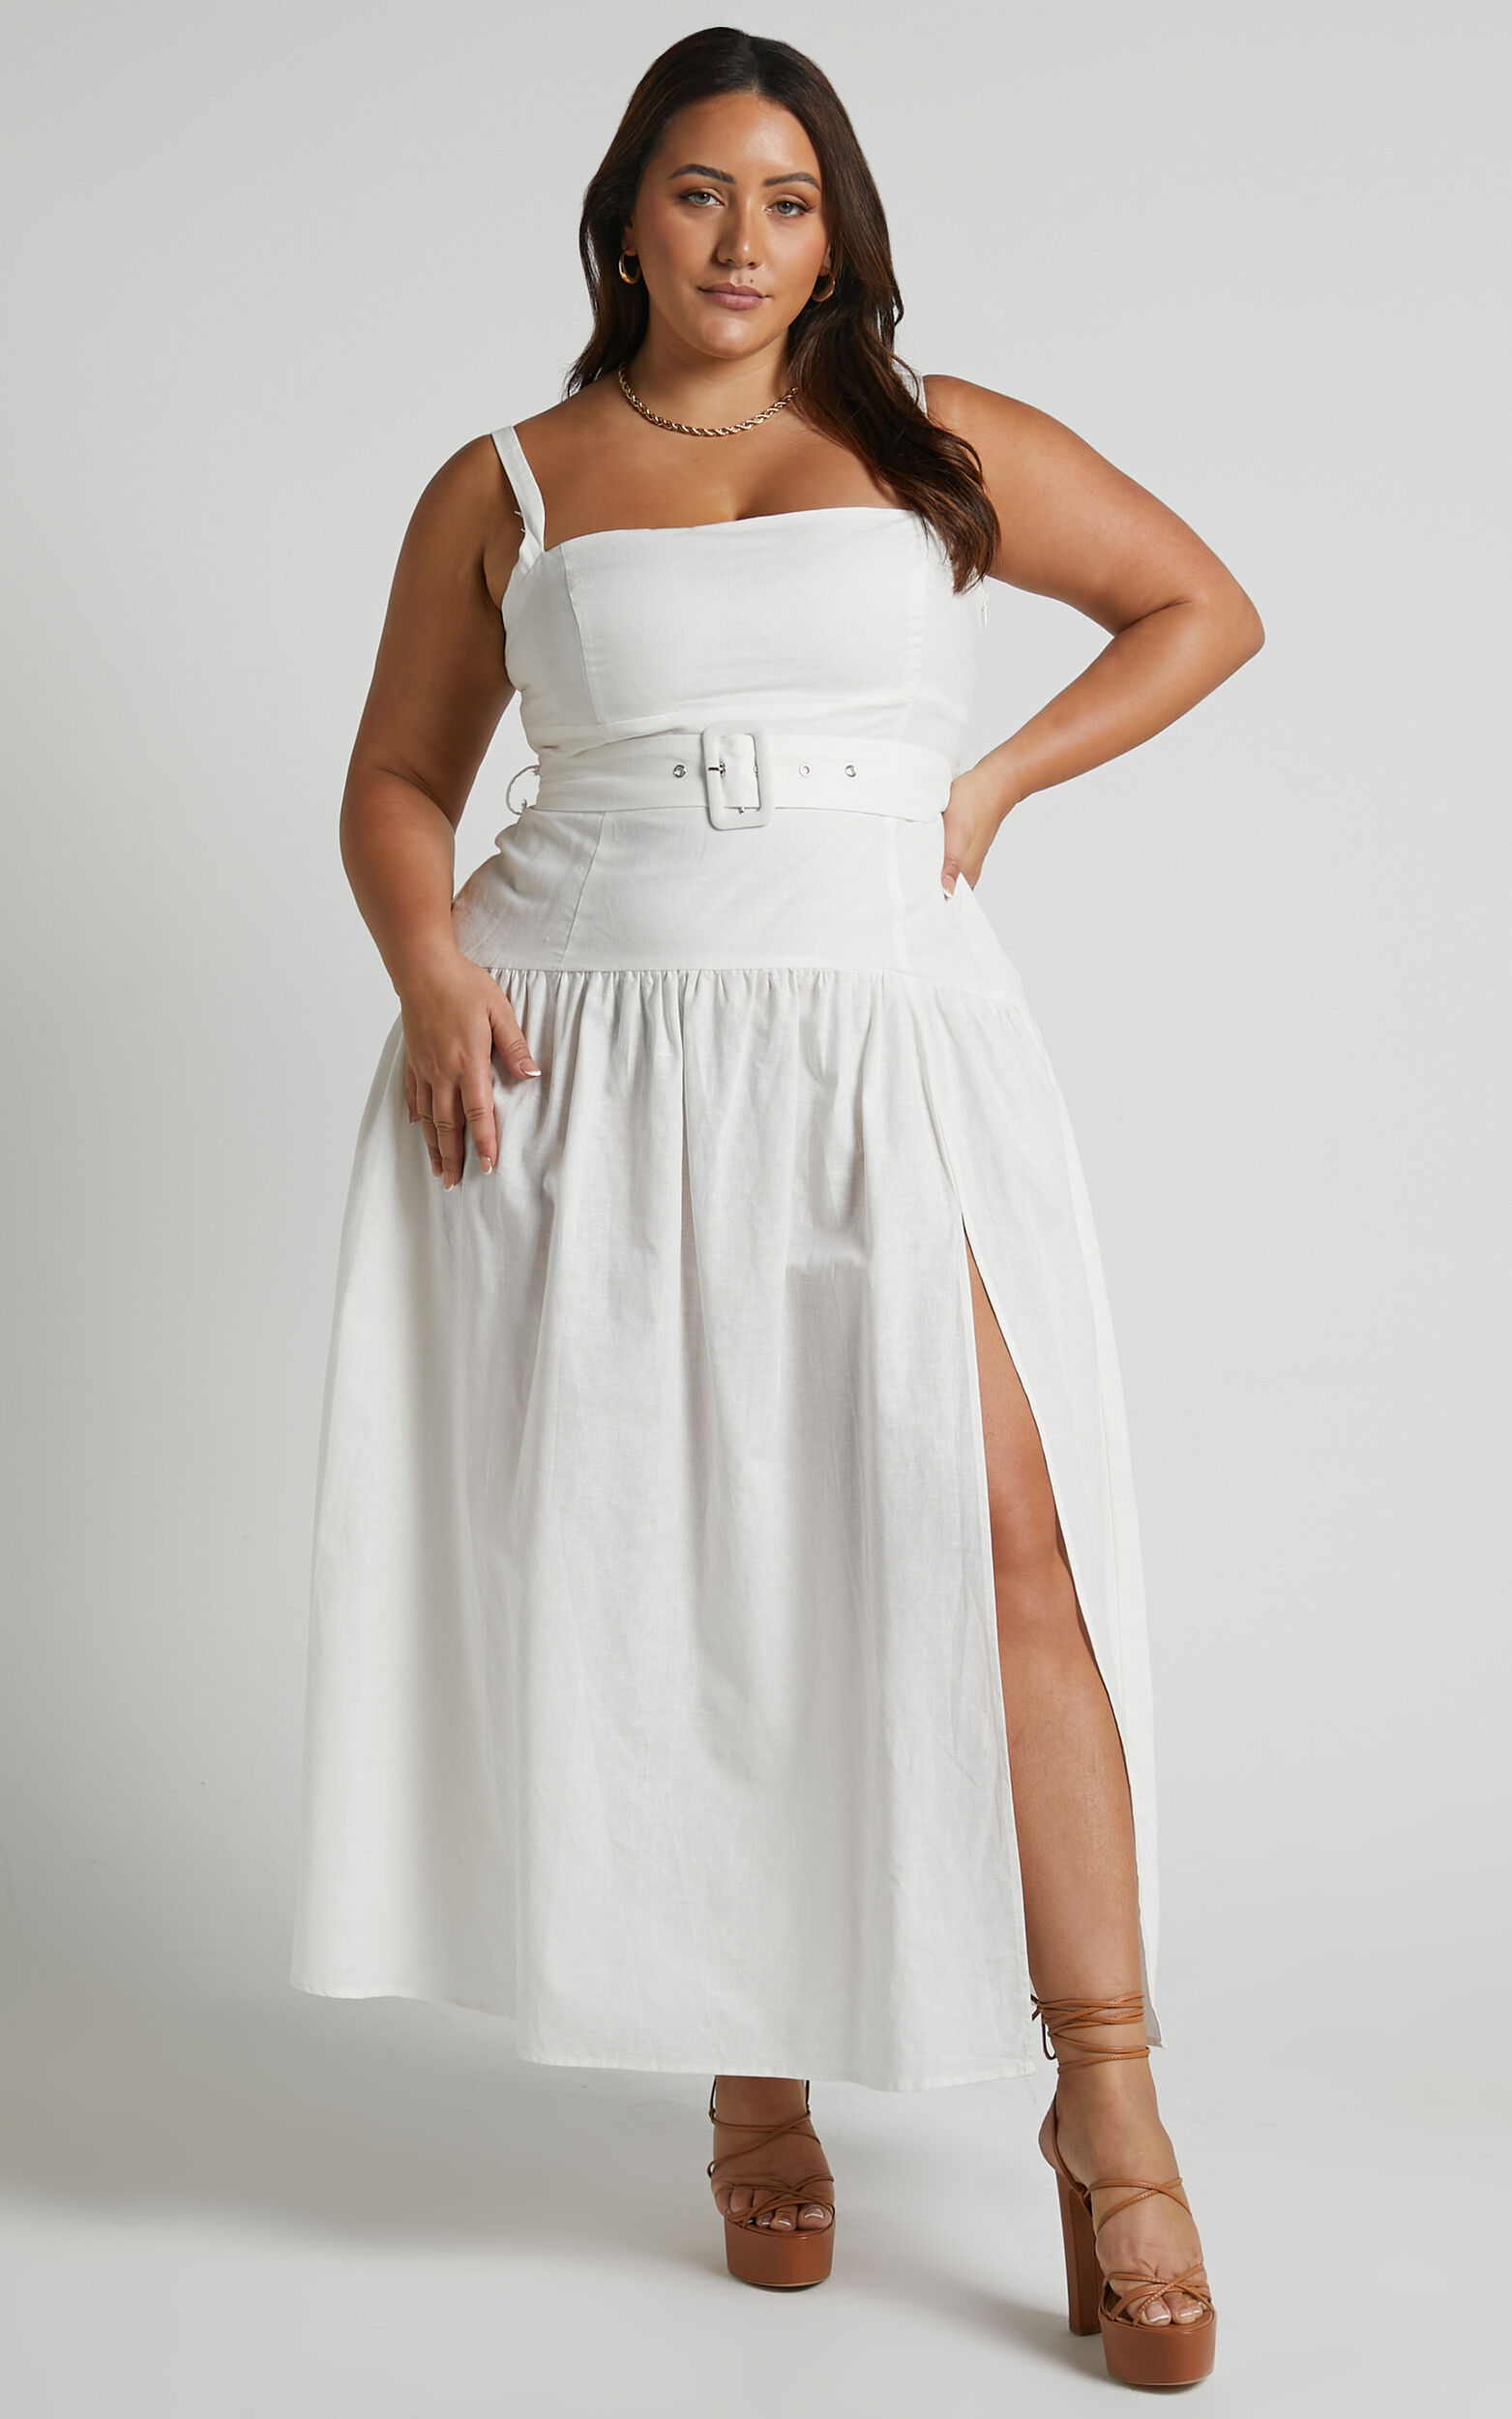 Amalie The Label - Elinora Belted Panelled Midaxi Dress in White - 06, WHT1